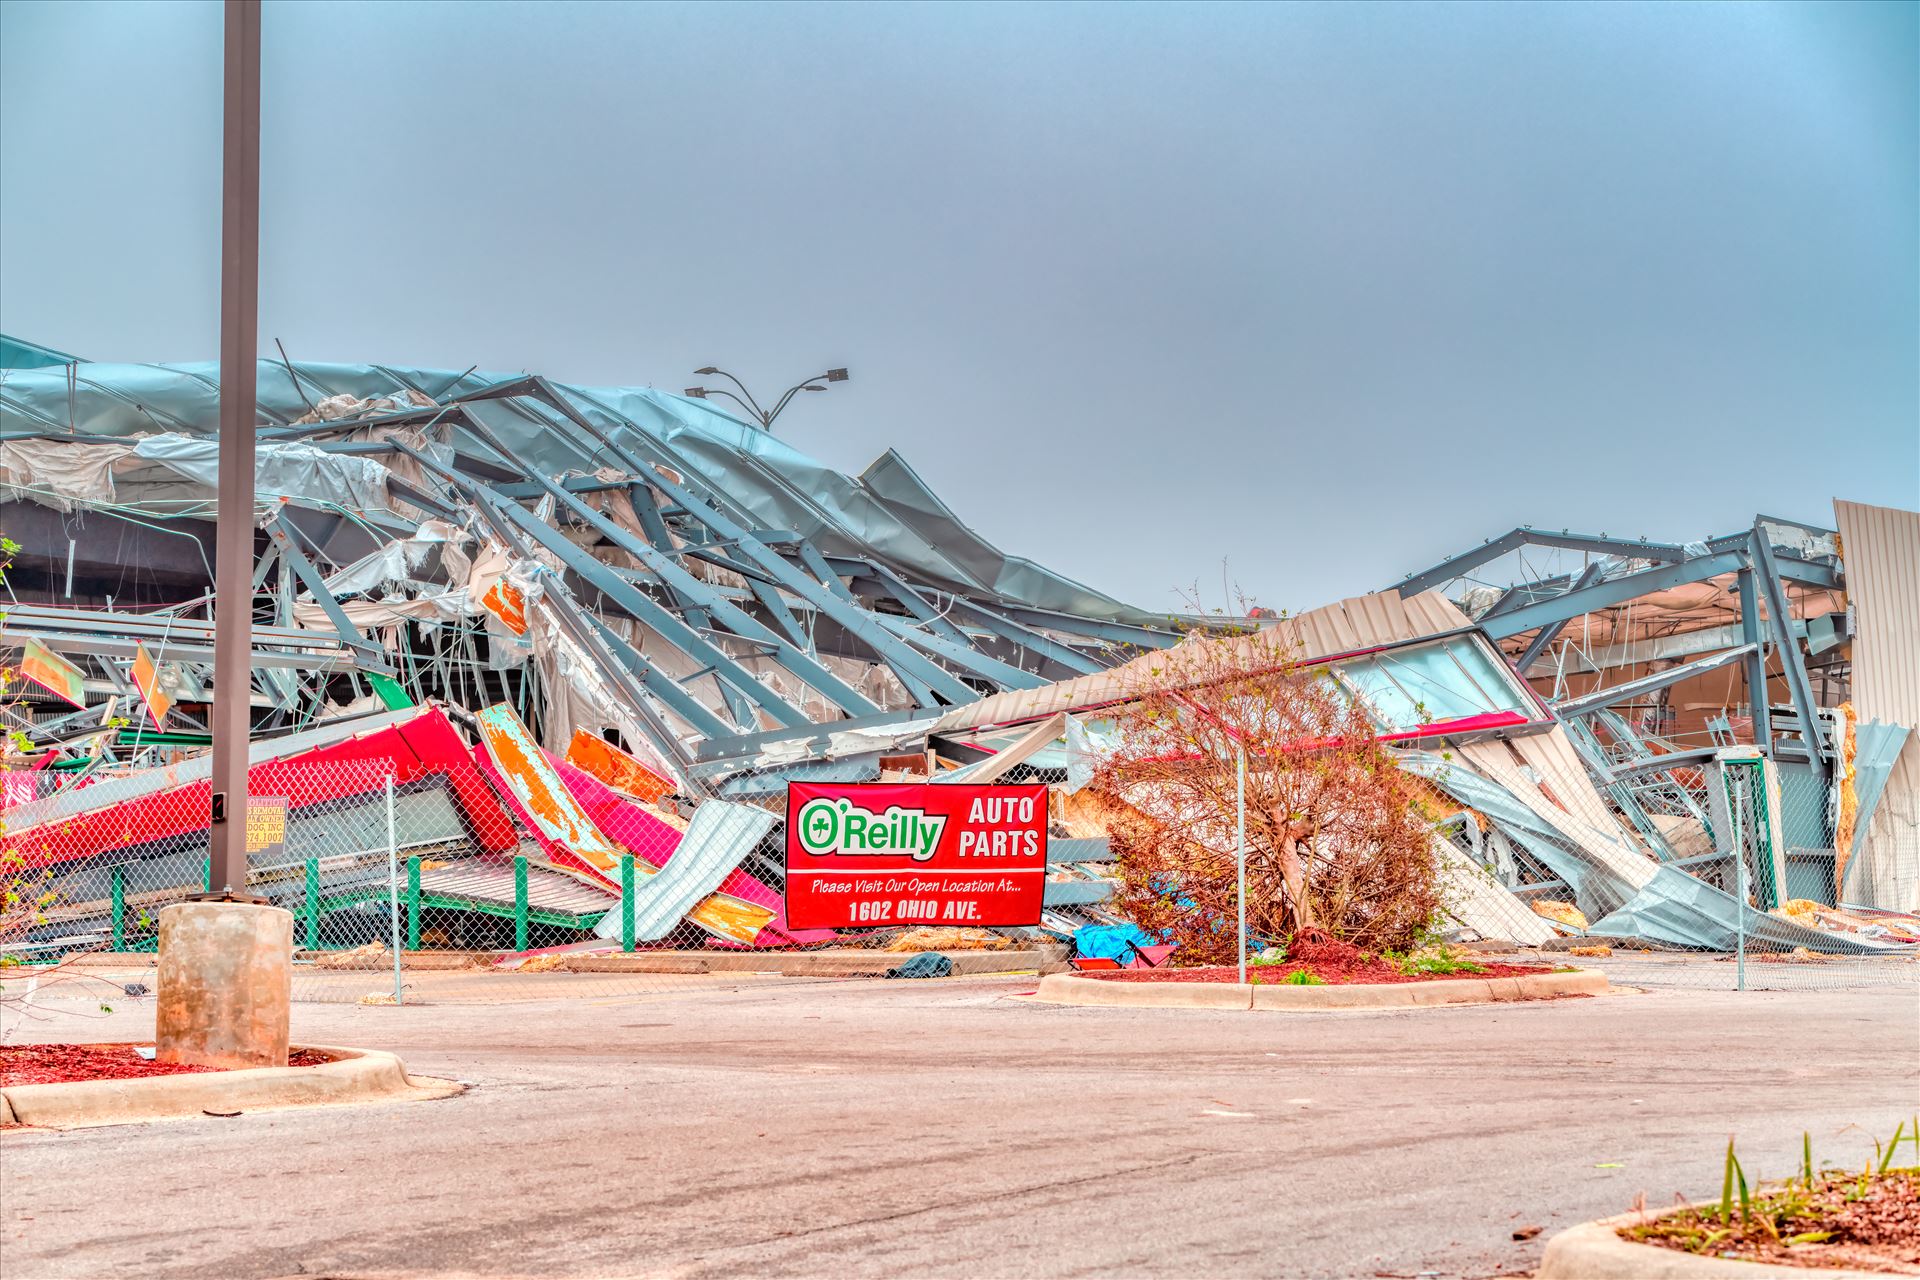 Hurricane Michael Panama City, Florida, USA 12/30/2018 O'Reilly Auto Parts on HWY 98 destroyed by hurricane Michael by Terry Kelly Photography